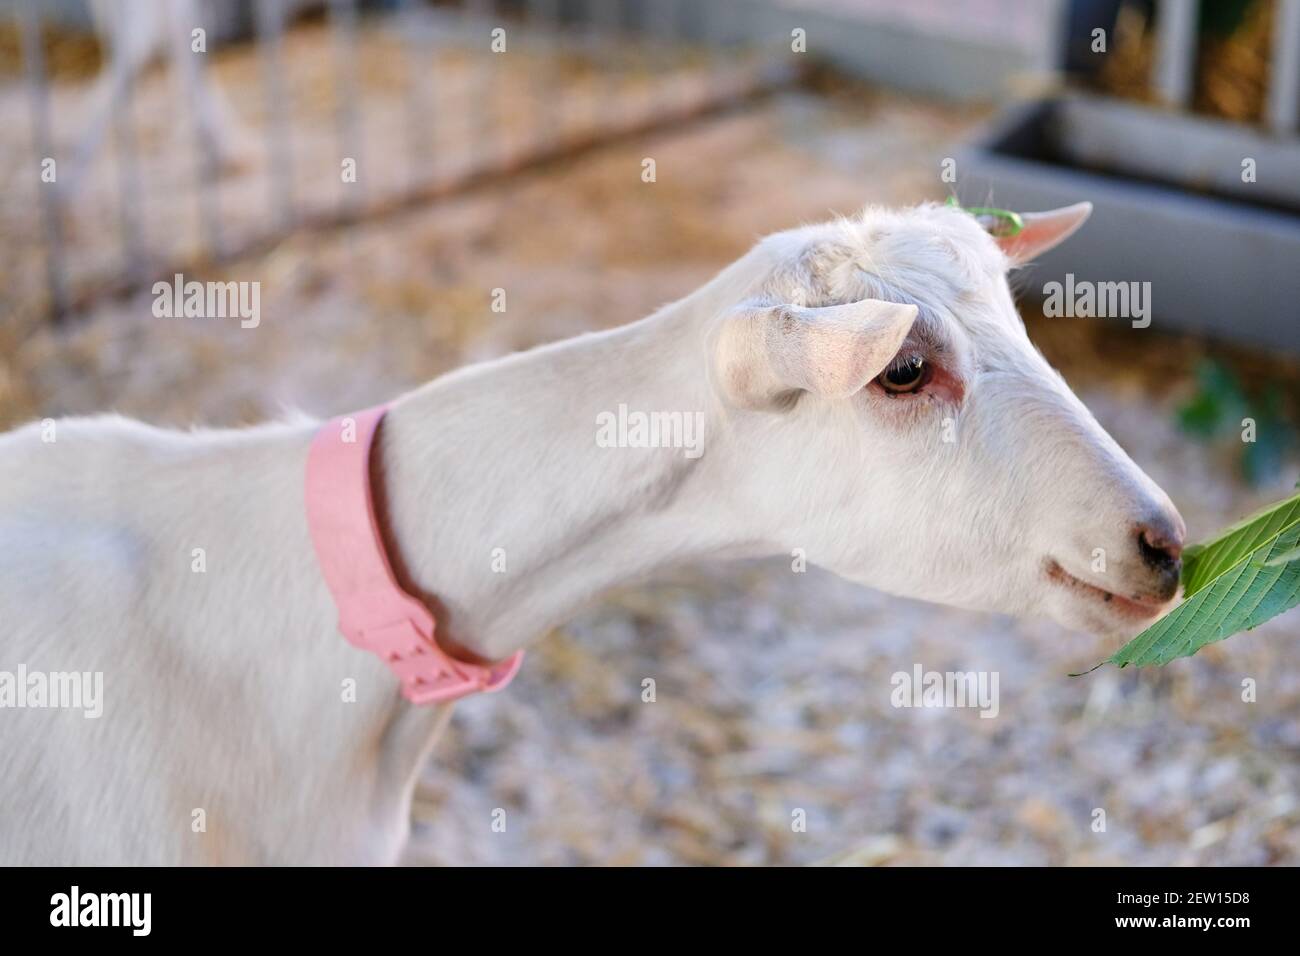 White young goat in pink collar eats green leaf in stable on farm. Feeding on animal farm. Stock Photo